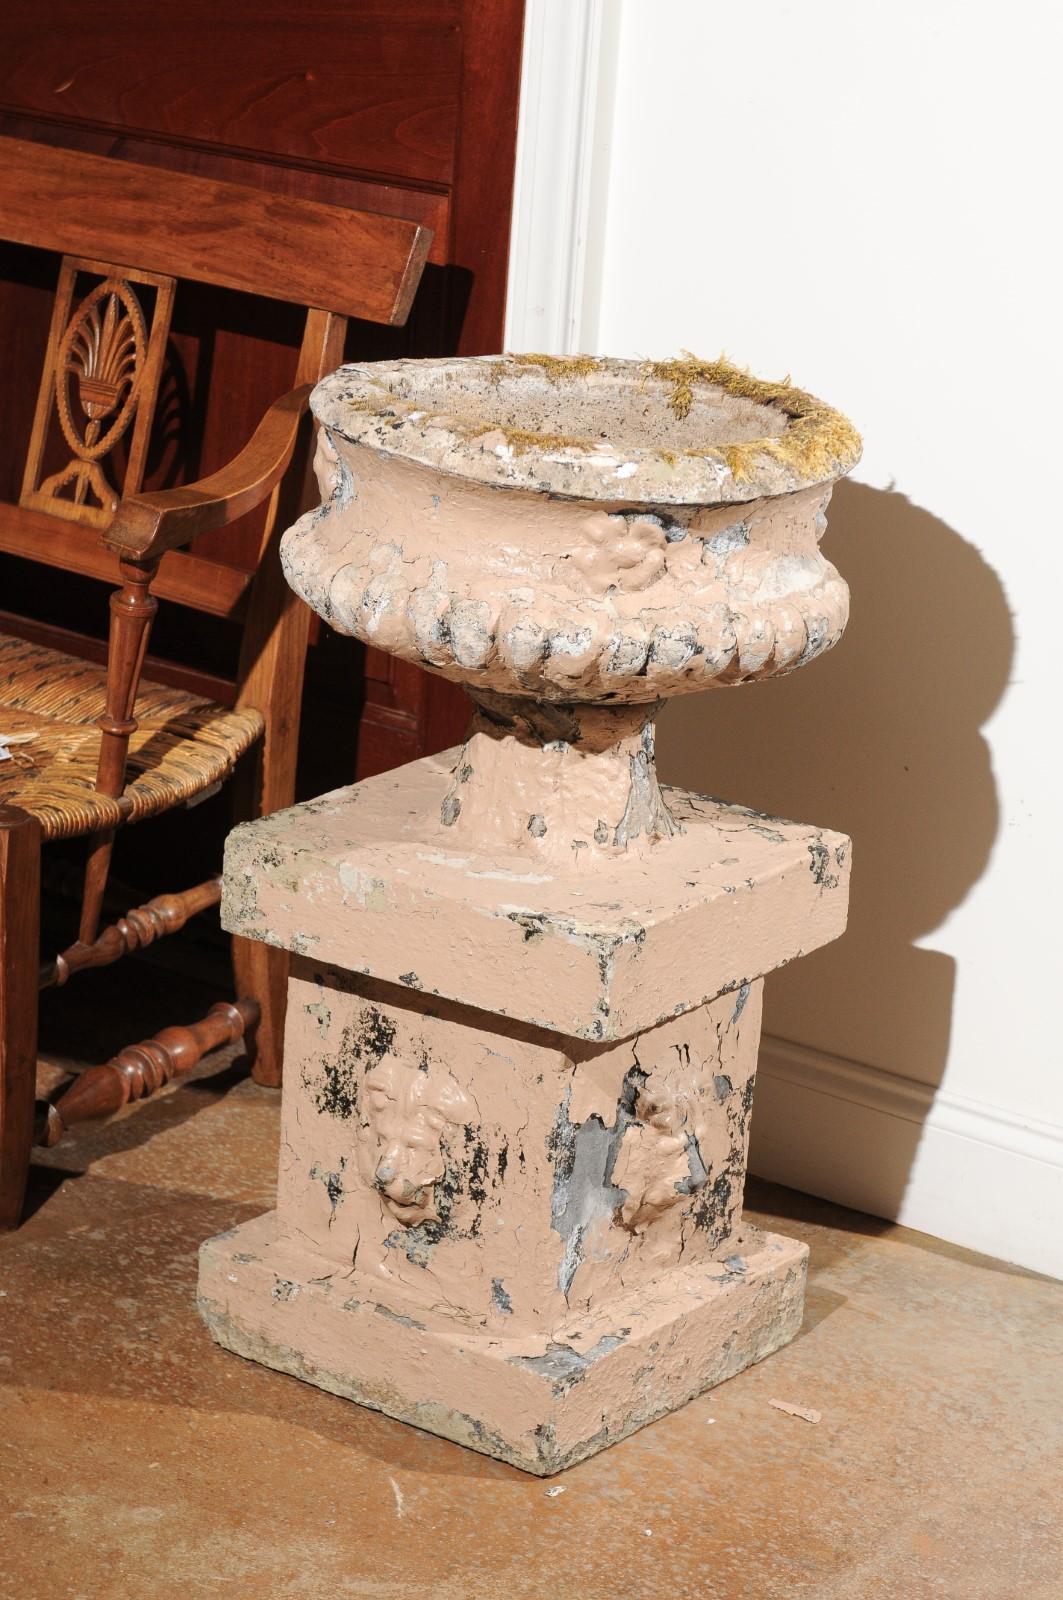 A pair of English Edwardian period reconstituted stone urns on pedestals from the early 20th century, with lion heads and distressed appearance. Born in England at the beginning of Edward VII's reign, this pair of urns attracts our attention with